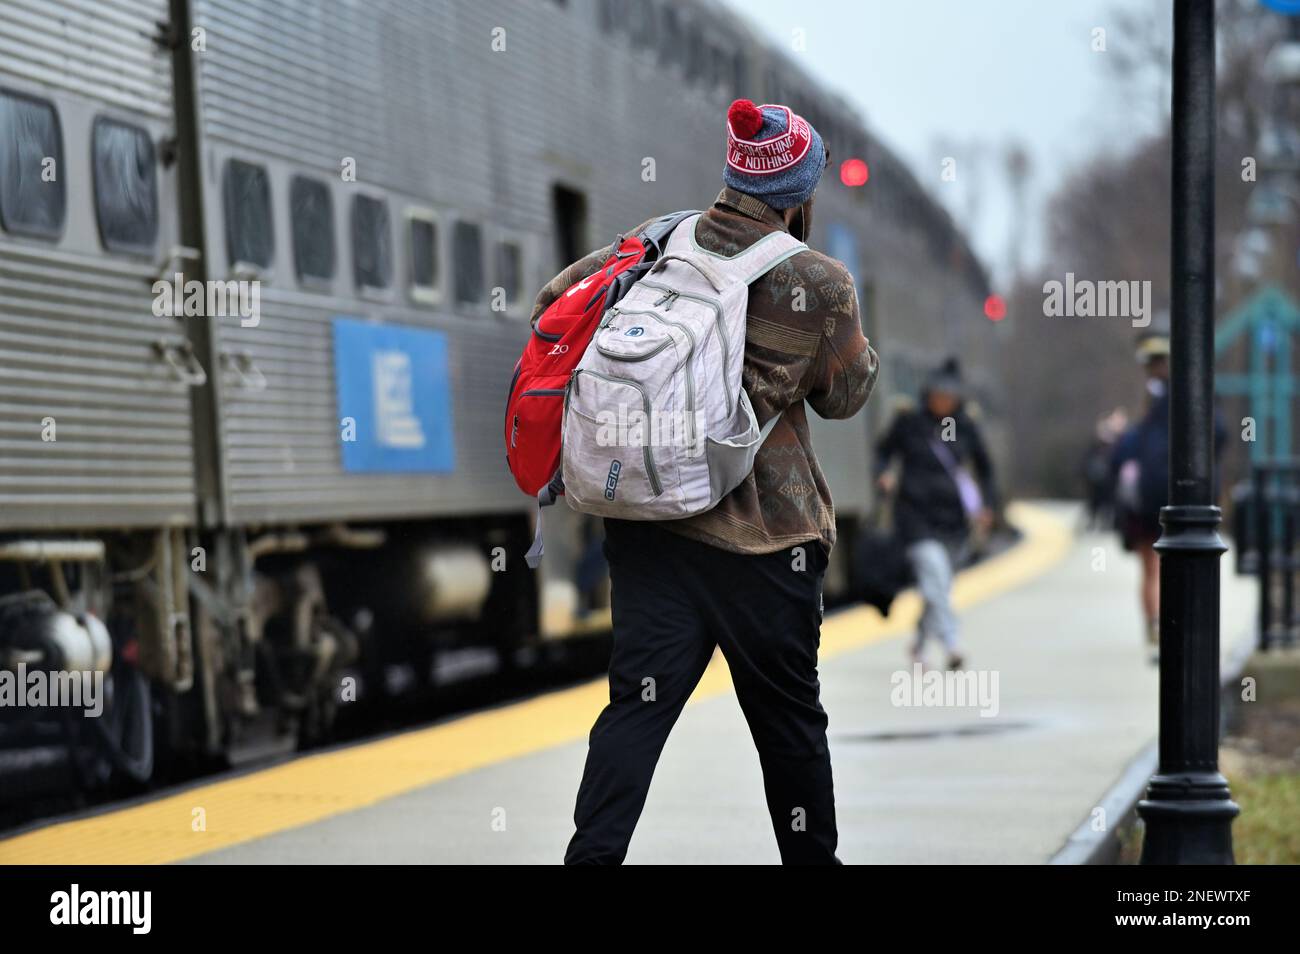 Winfield, Illinois, USA. Passengers disembarking a Metra commuter train in the western suburbs of Chicago. Stock Photo